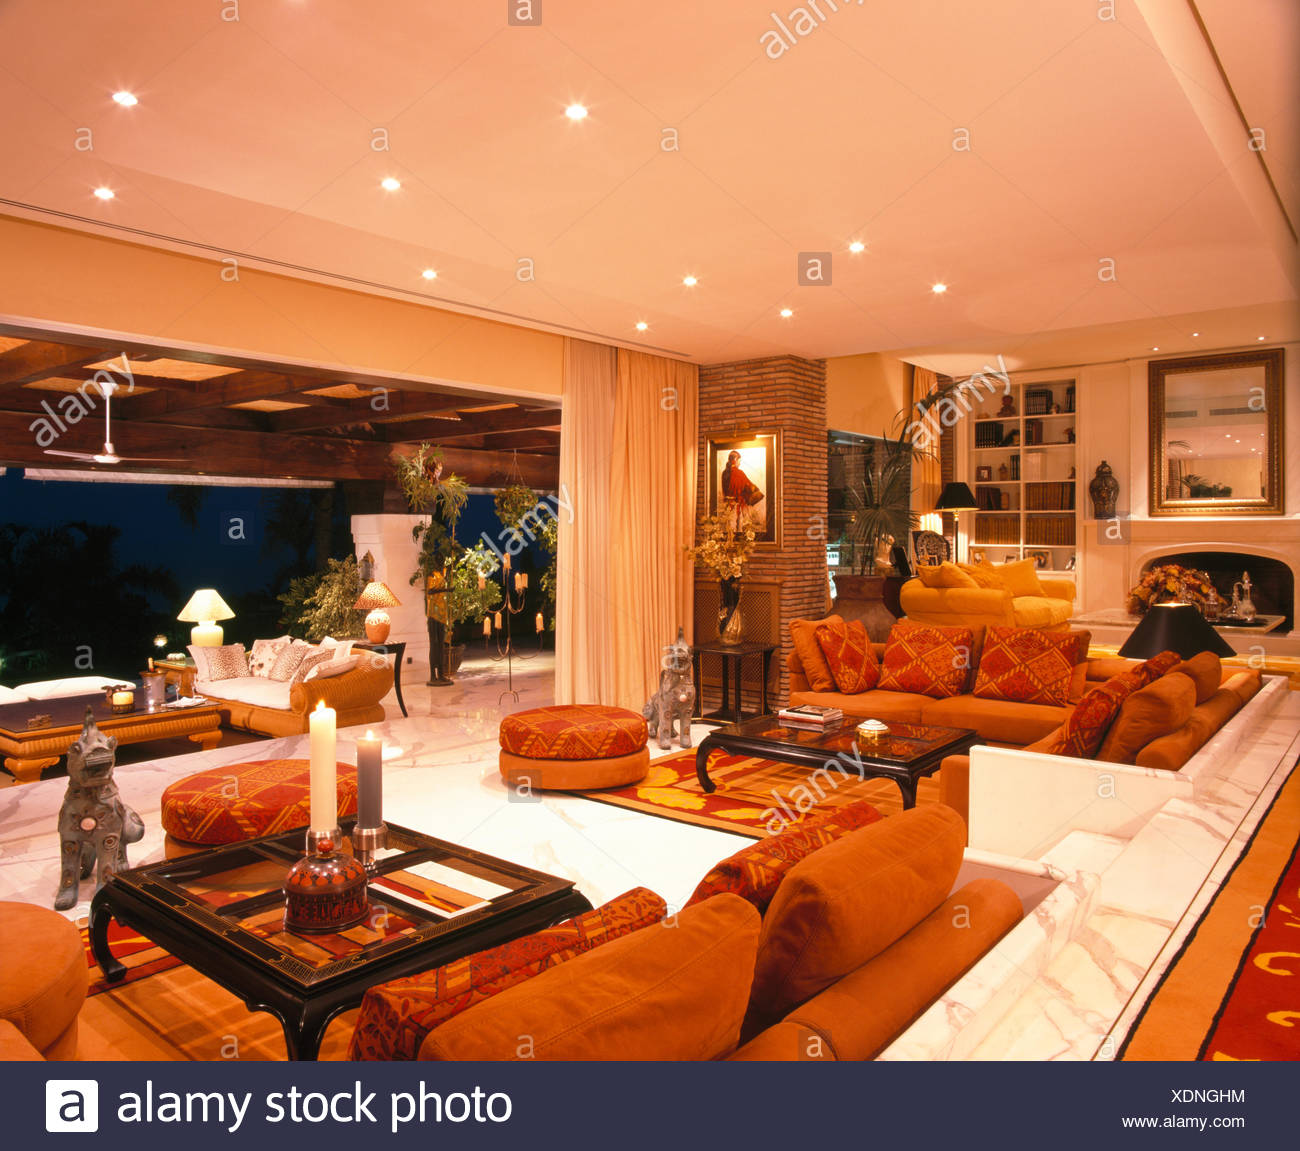 Orange Sofas And Rugs In Living Room In Large Spanish Villa With Open Doors To The Terrace Stock Photo Alamy